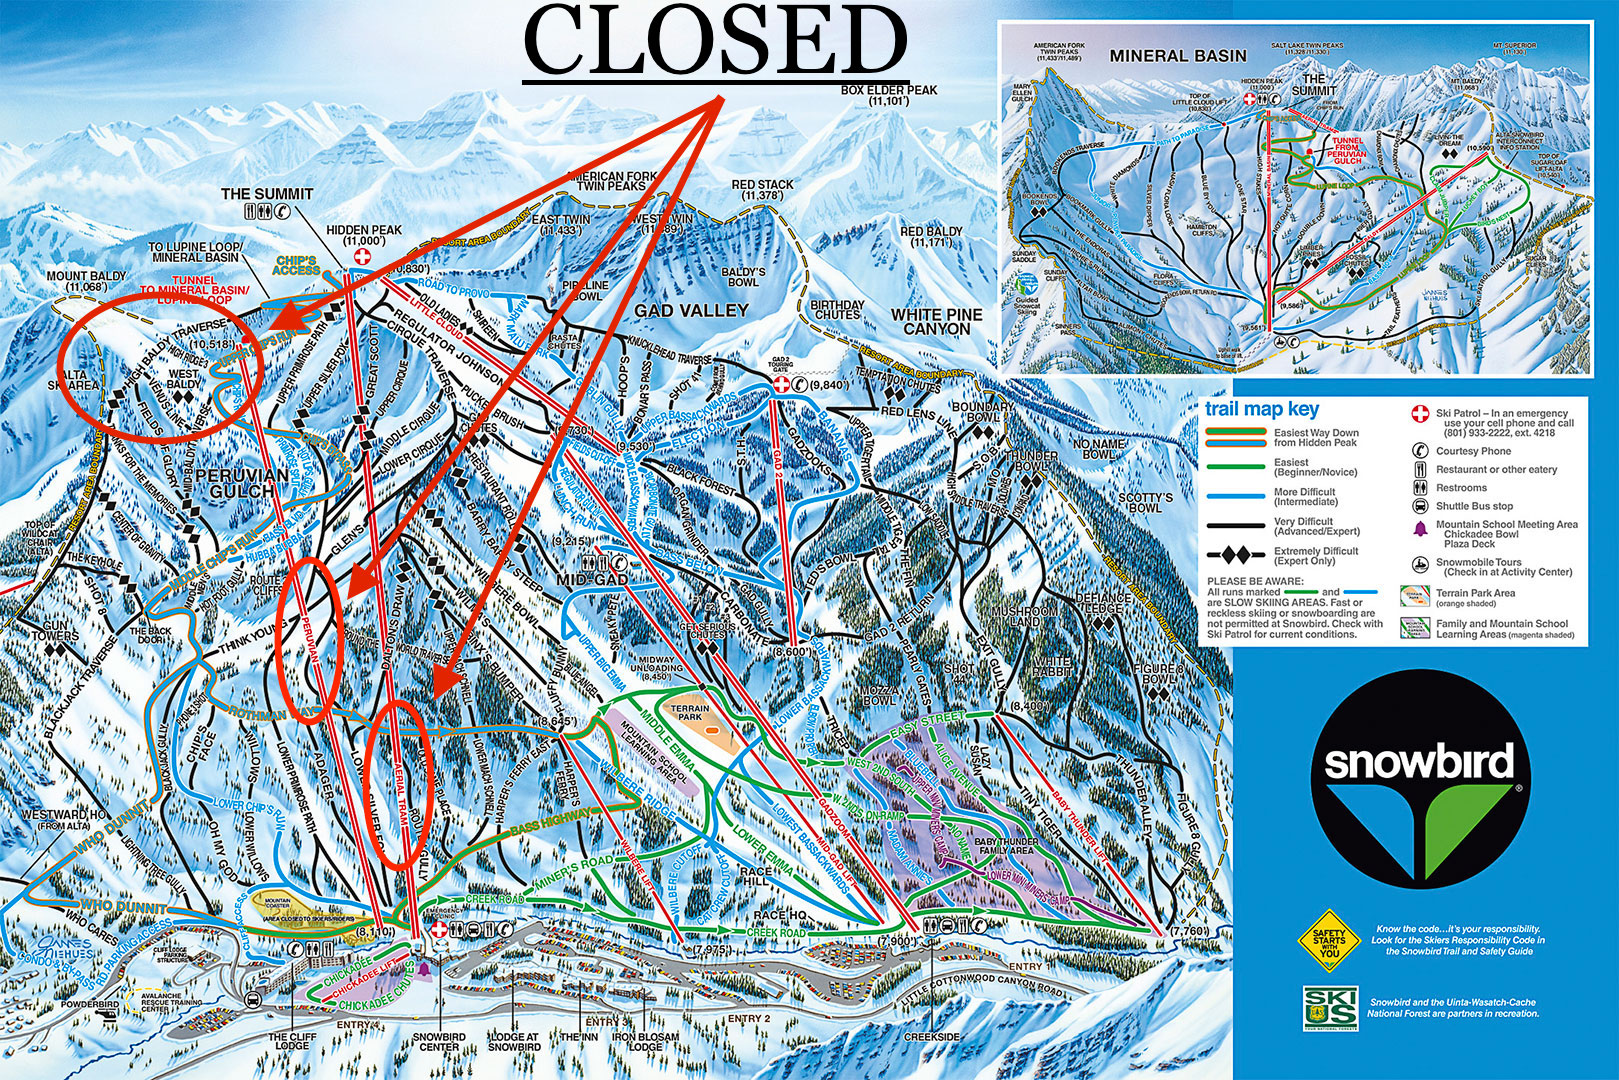 Map showing zones that will be closed beginning April 18th, 2016 at Snowbird, UT.